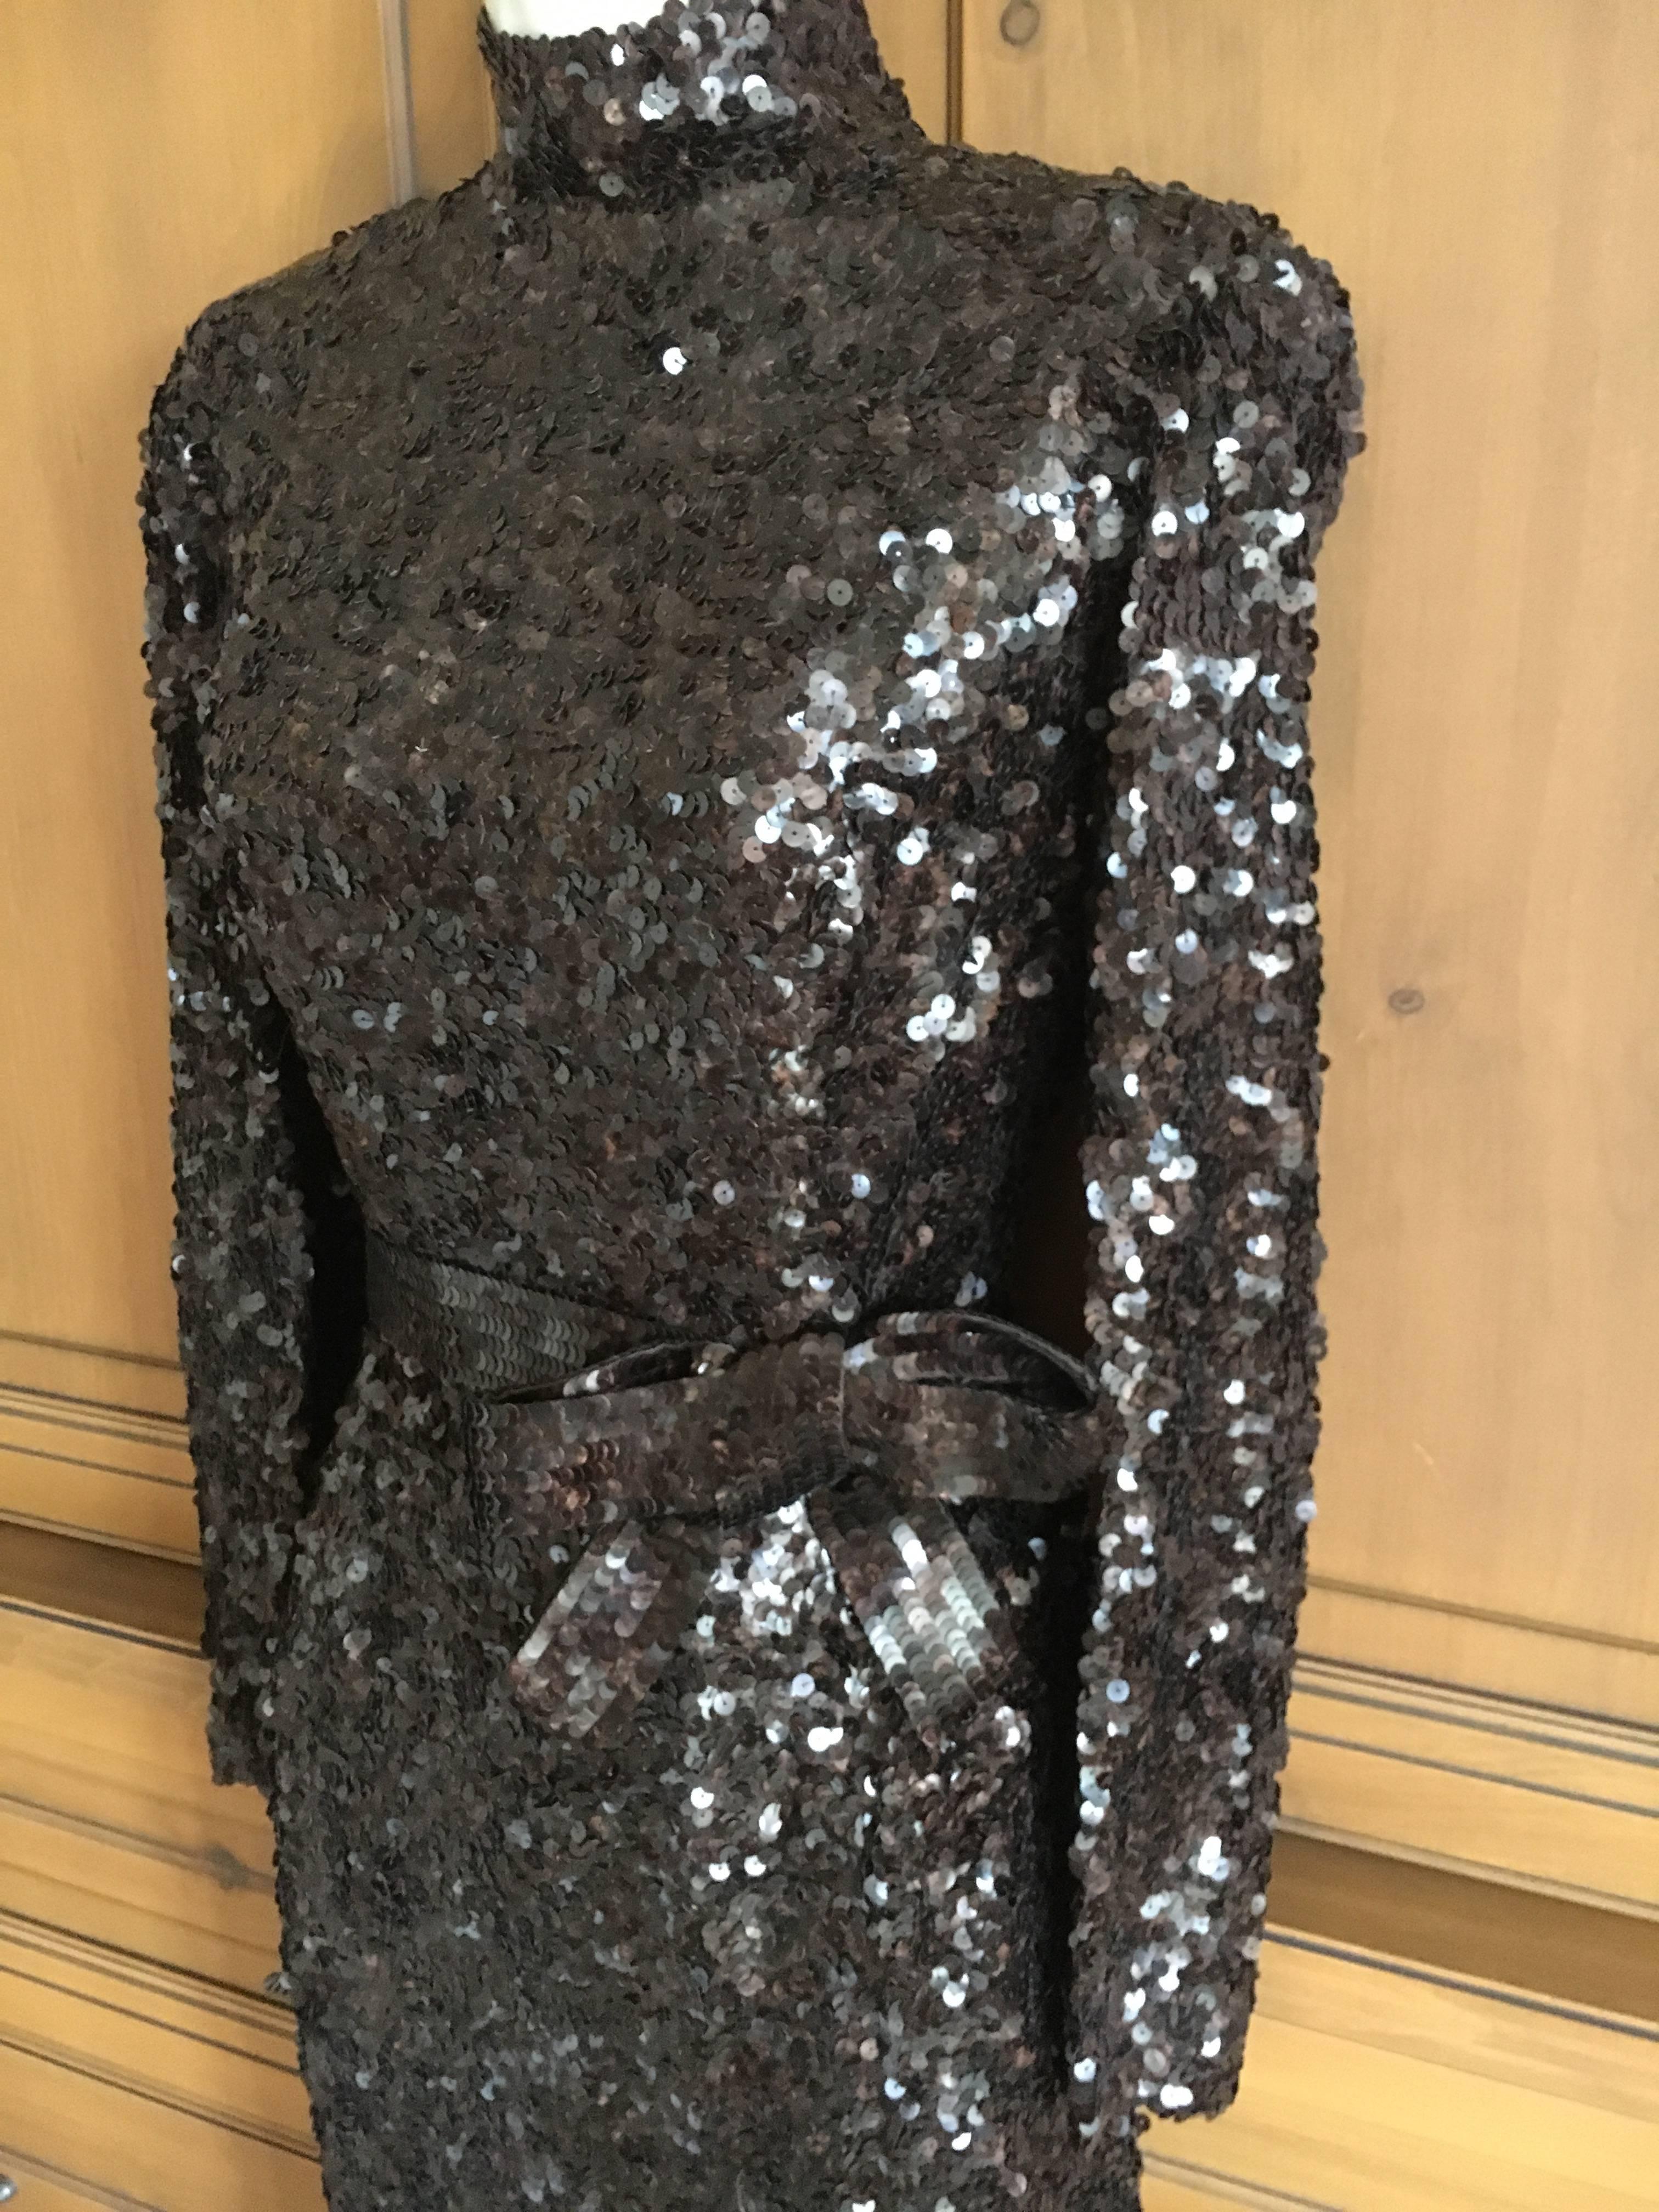 Norman Norell 1960's Sequin Cocktail Dress with Attached Bow Belt.
Norell was one of America's first 